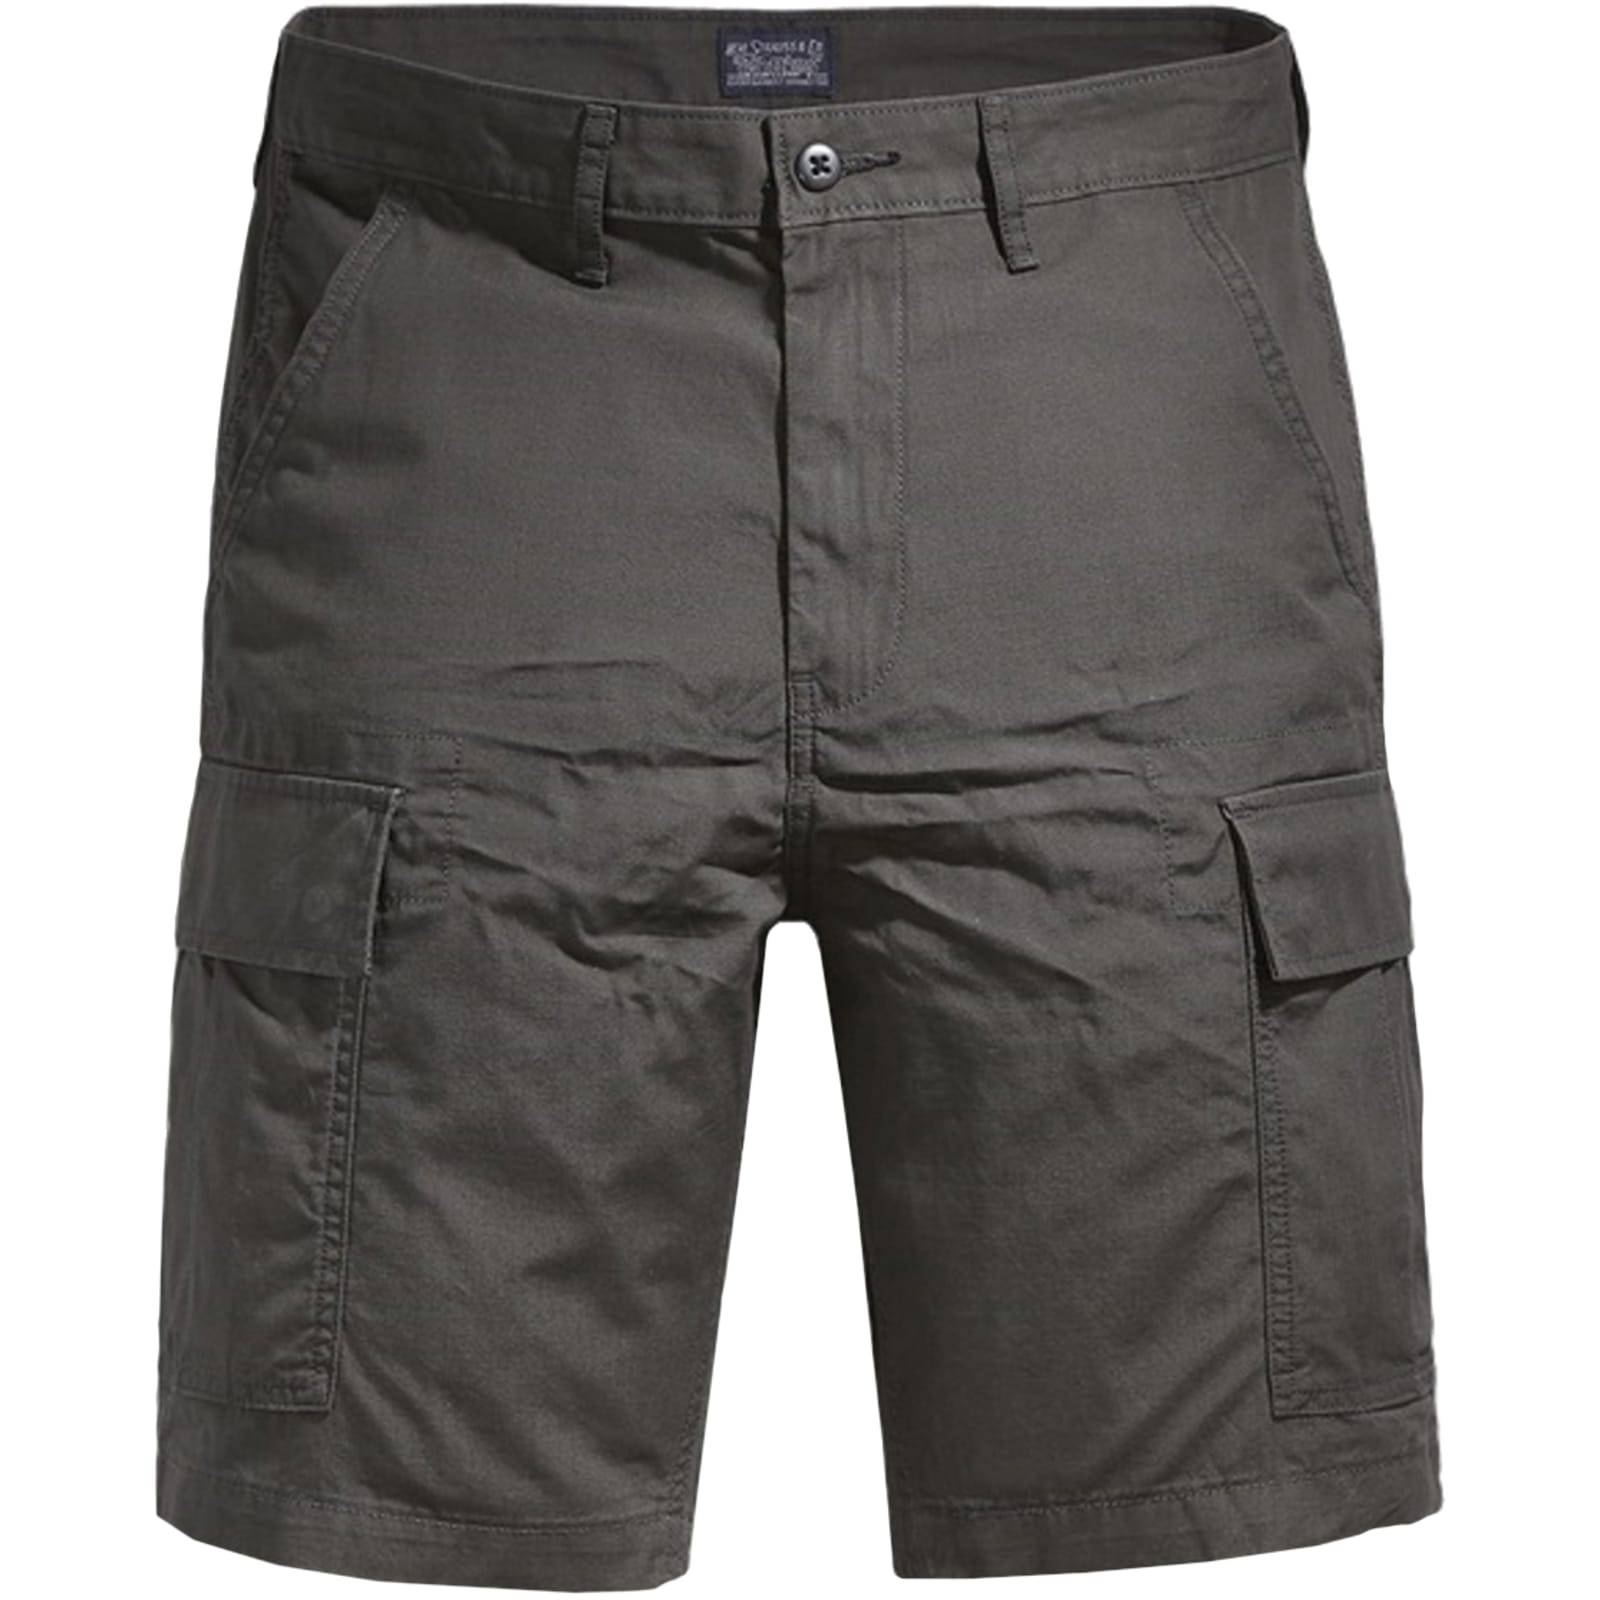 Men's Big & Tall Carrier Graphite Ripstop Cargo Shorts by Levi's at Fleet  Farm